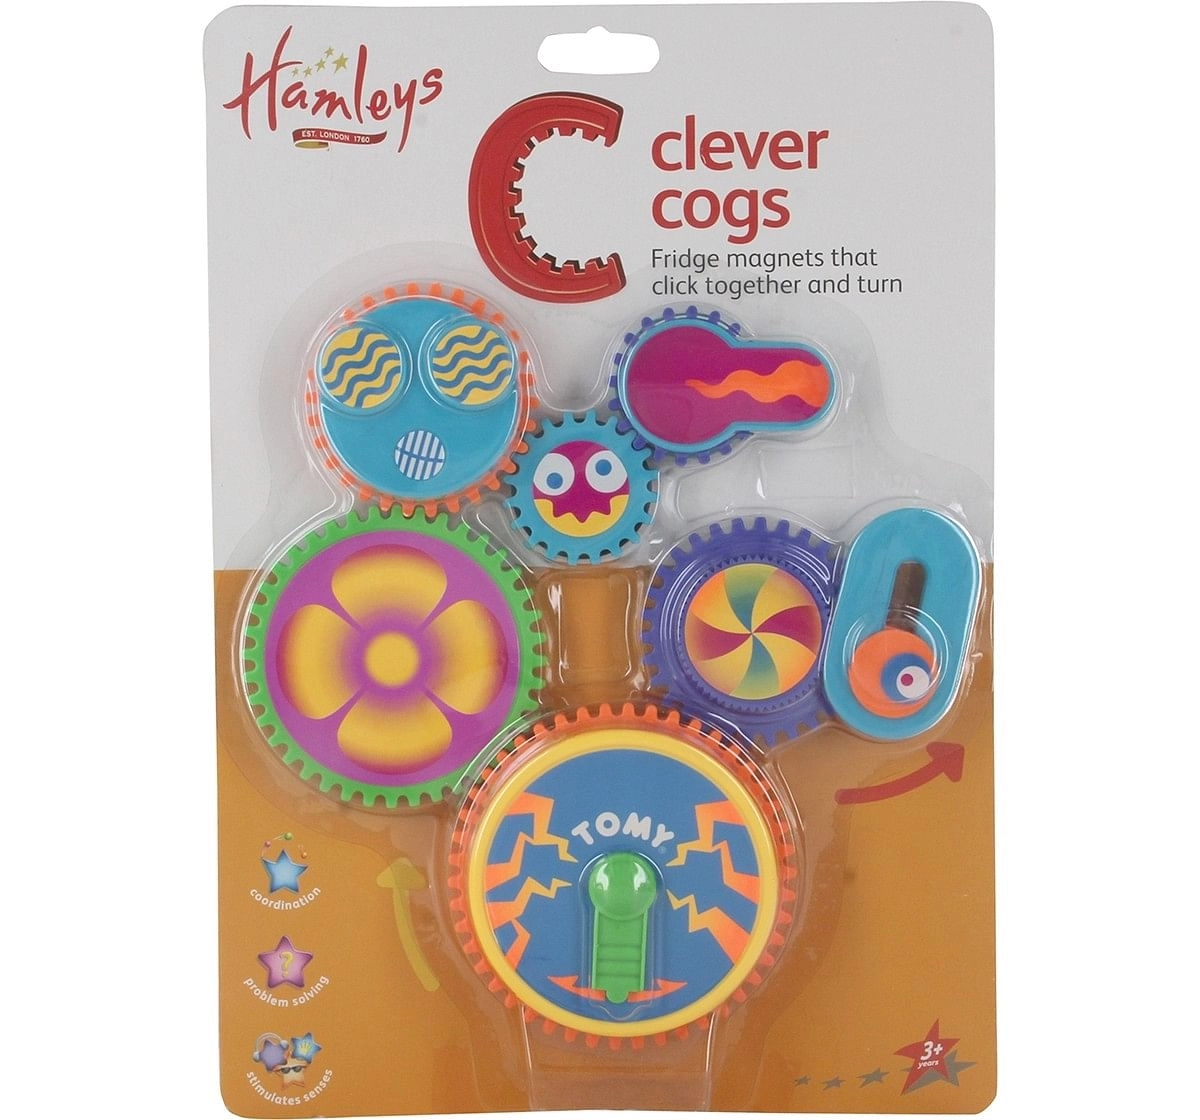  Hamleys Clever Cogs Magnet Early Learner Toys for Kids age 3Y+ 